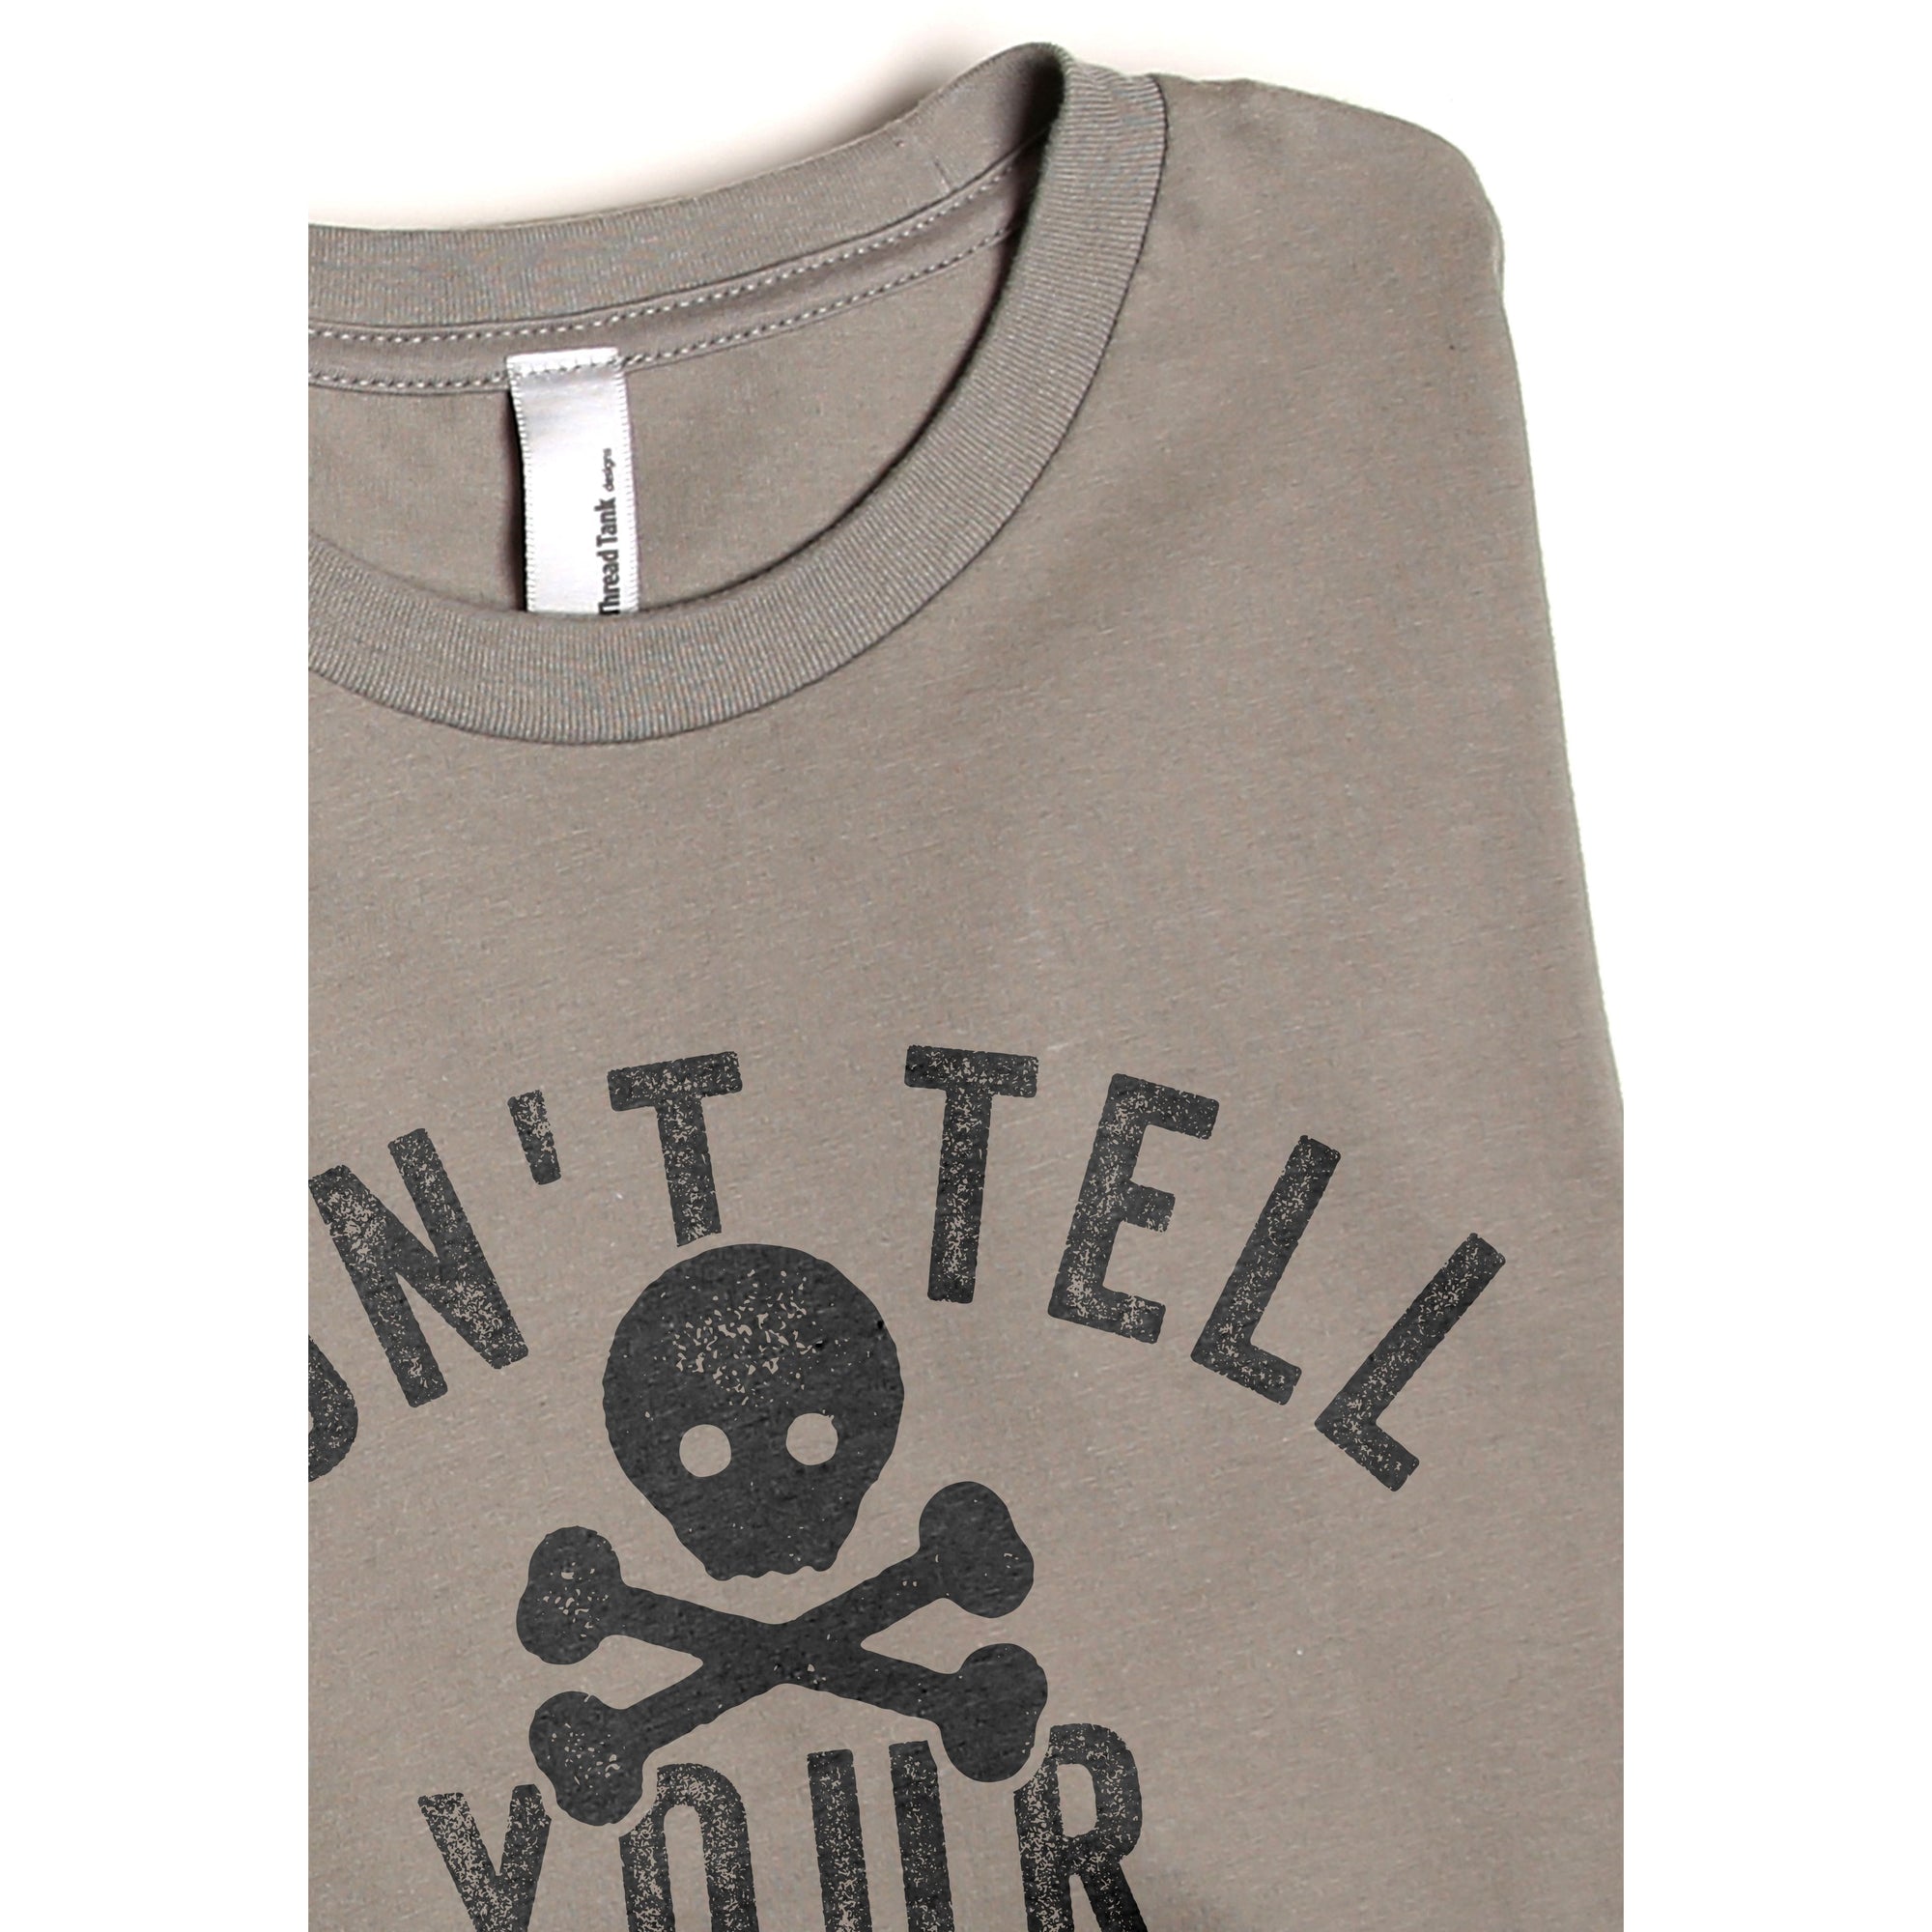 Don't Tell Your Mother - thread tank | Stories you can wear.